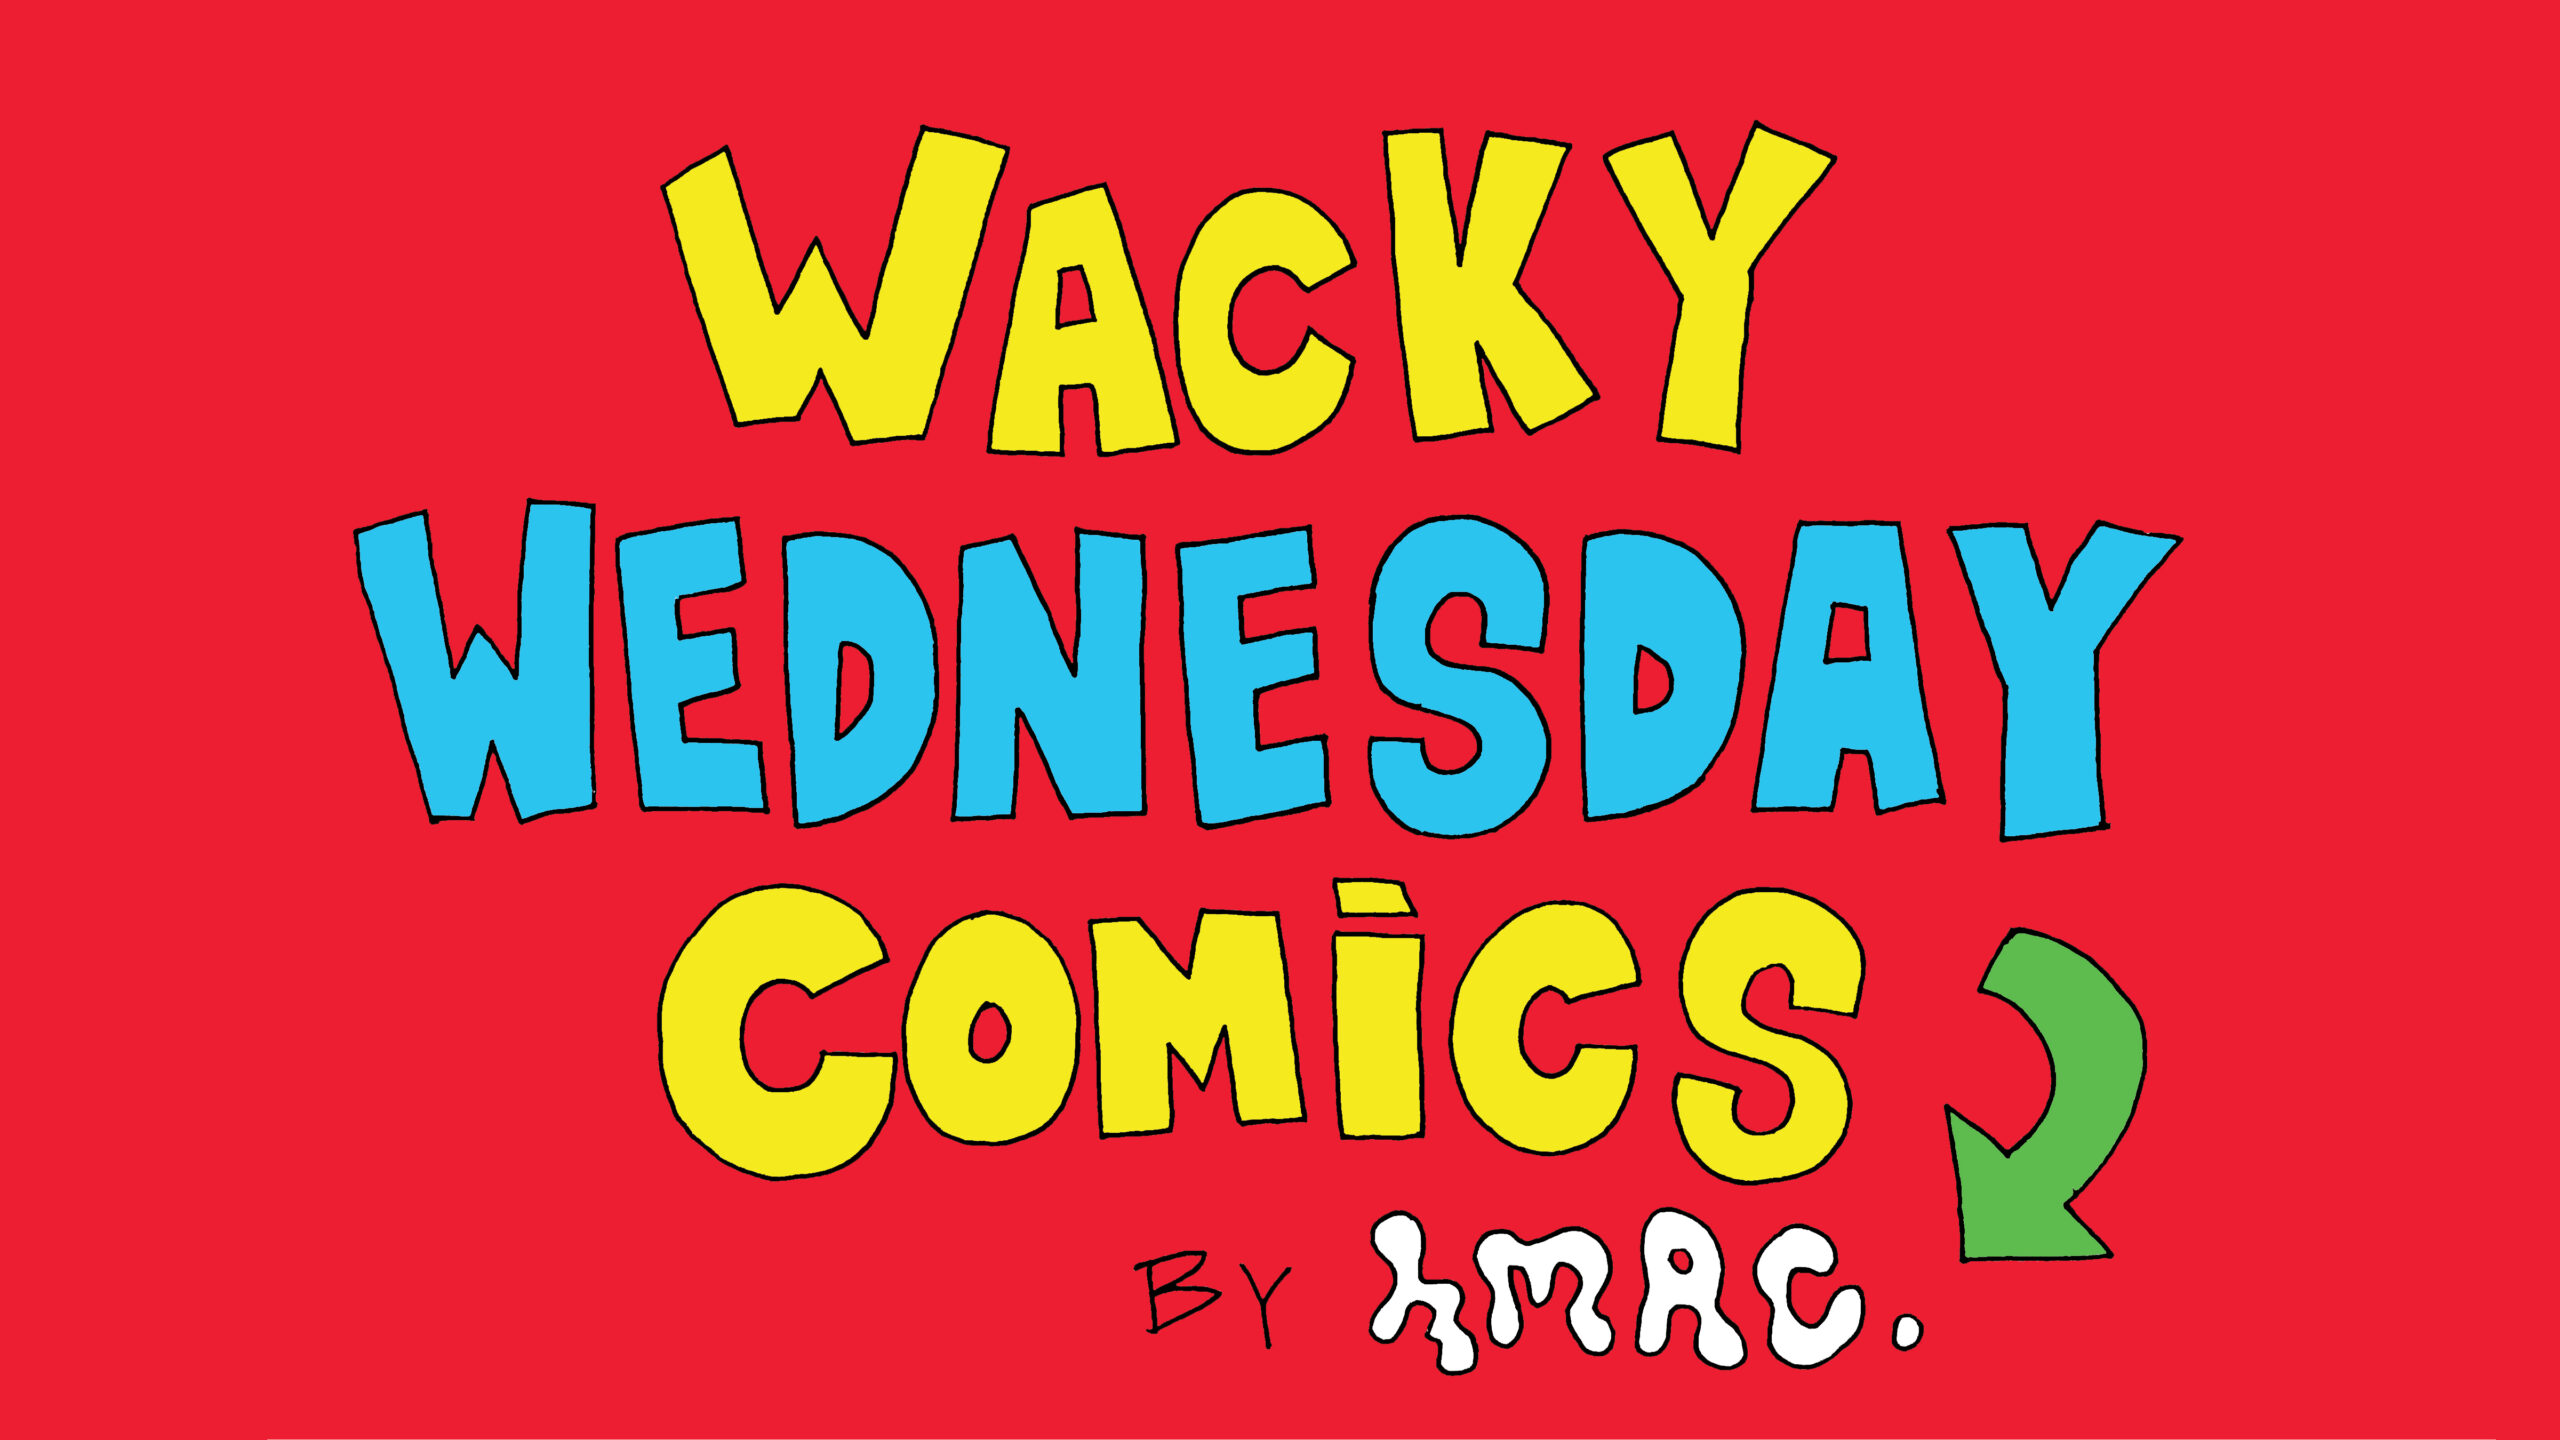 Red background with yellow and blue lettering reading "Wacky Wednesday Comics by Hmac"